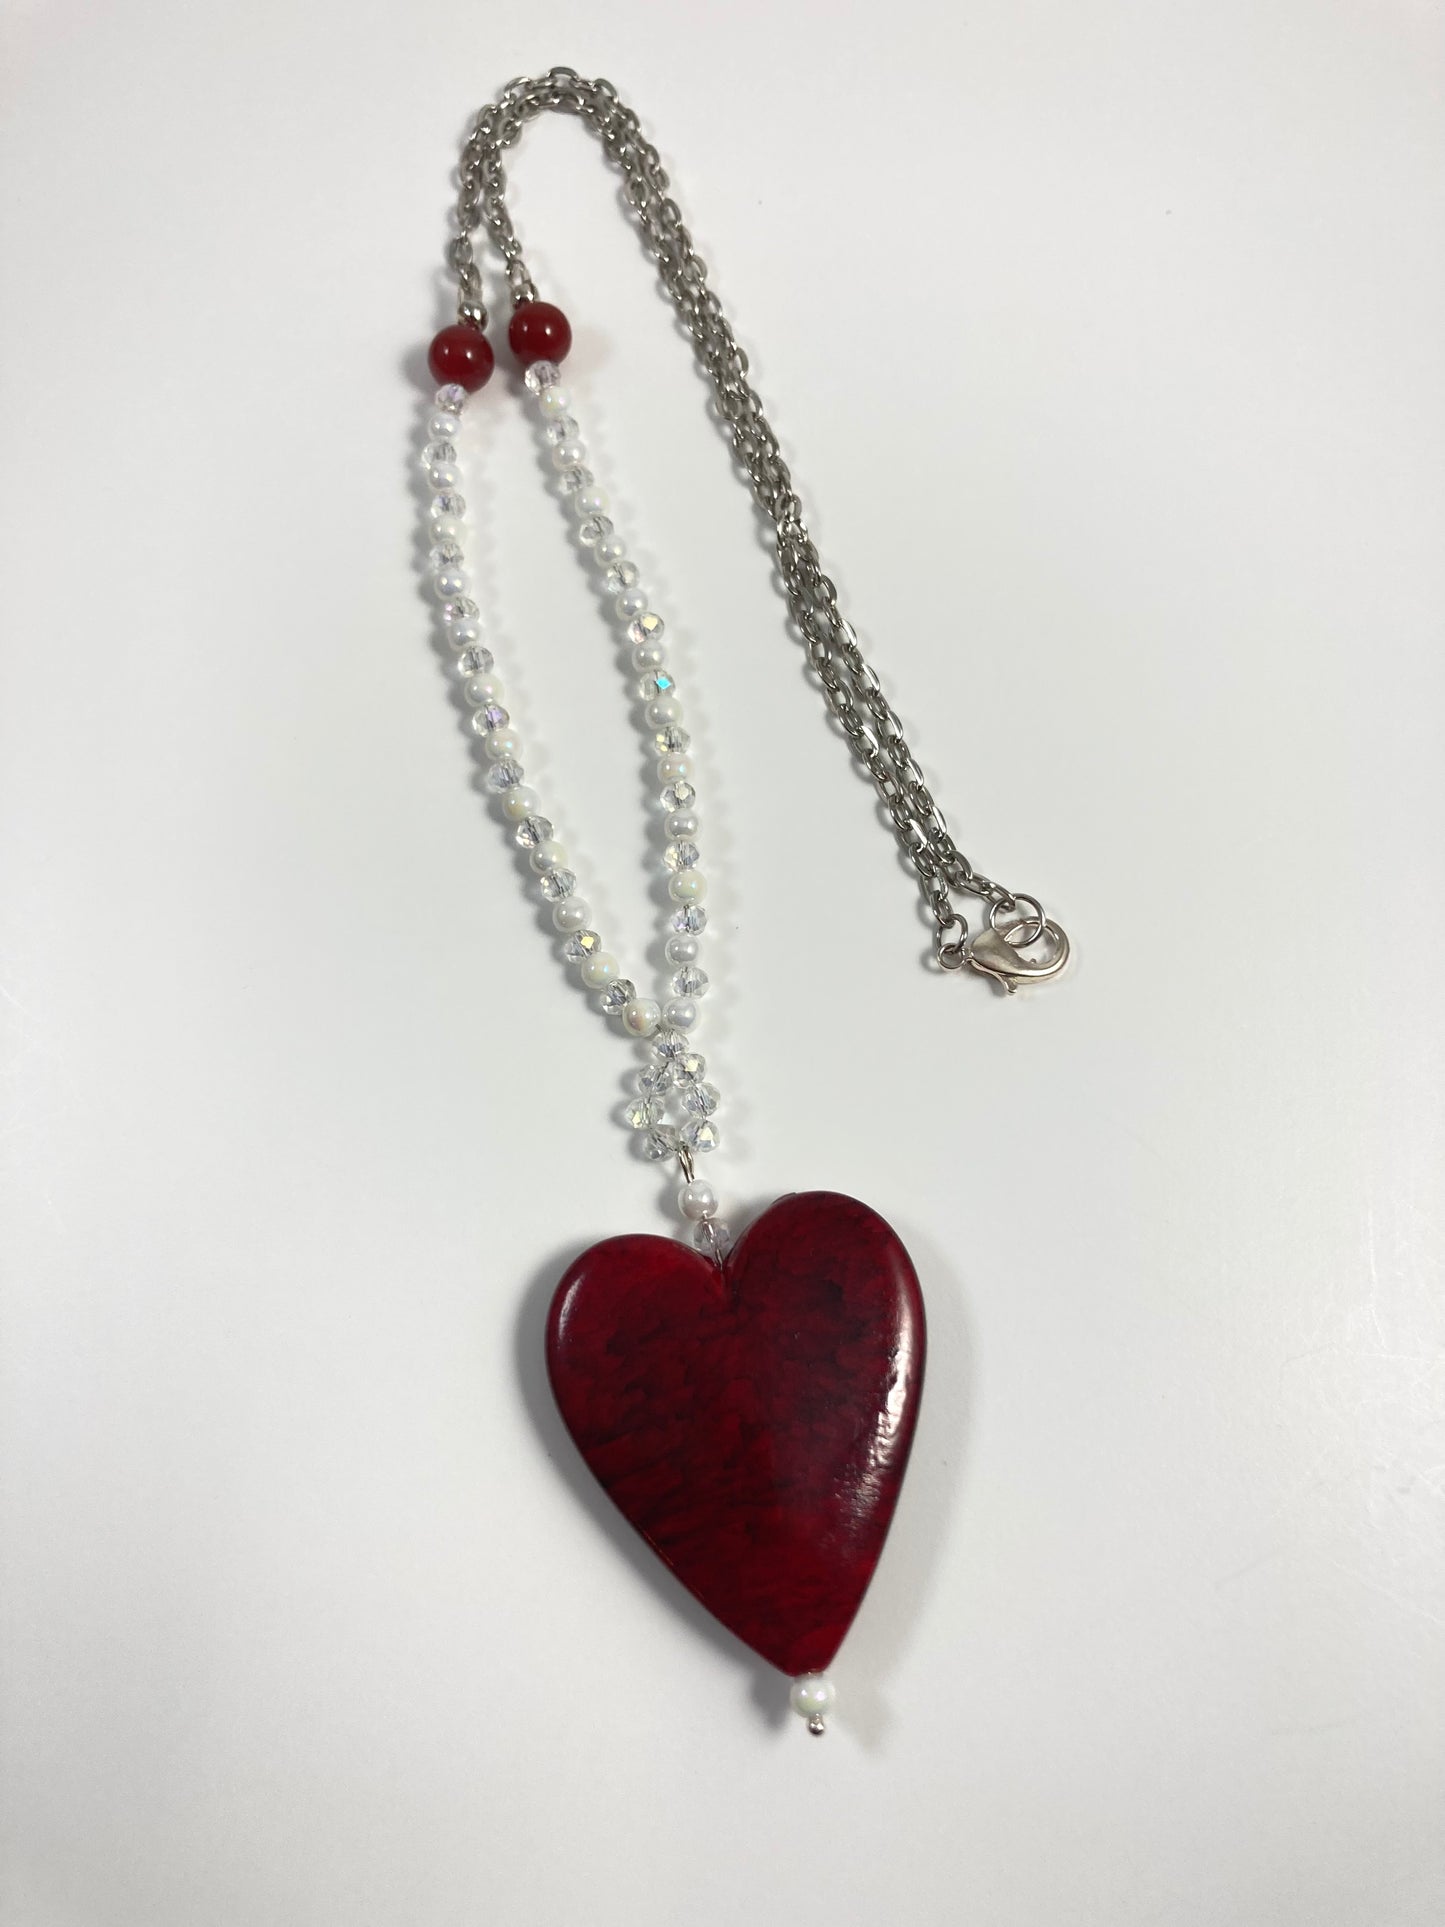 N24-C4 - Red, White & Clear Necklace w/ Red Heart Focal on Silver Chain